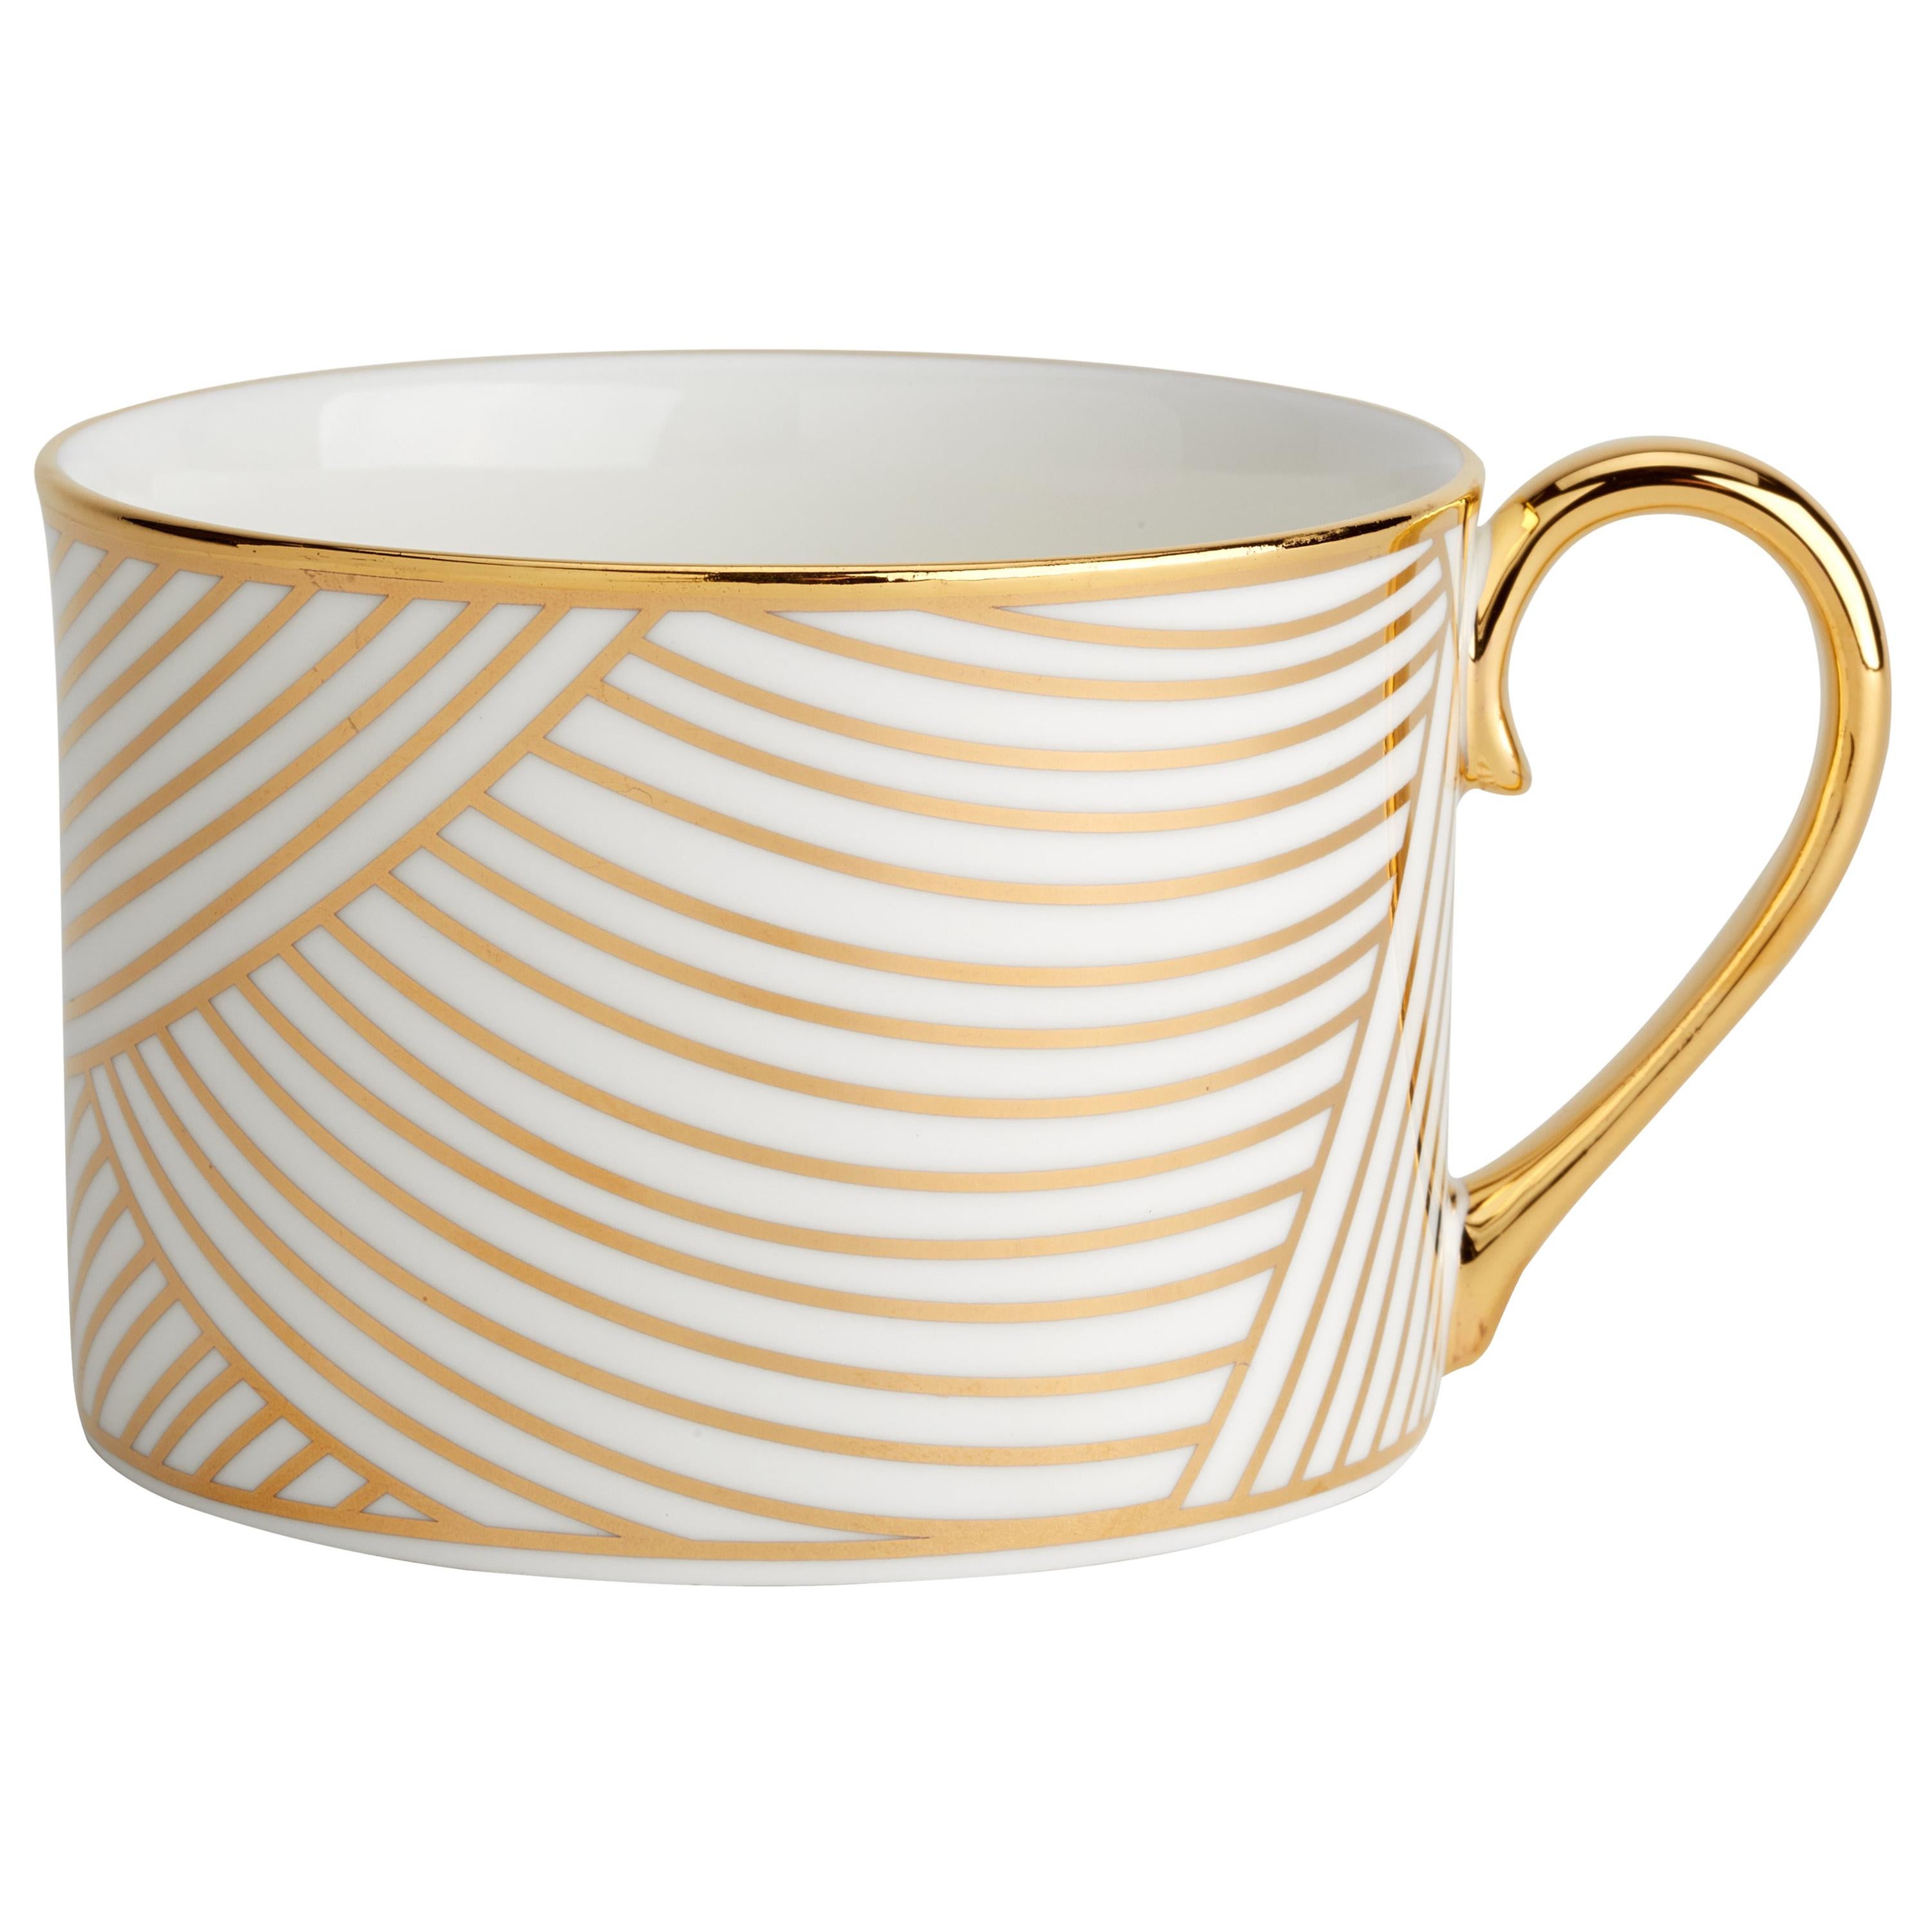 Fine Bone China Coffee Cup with 22-Carat Gold and Black Decals For Sale